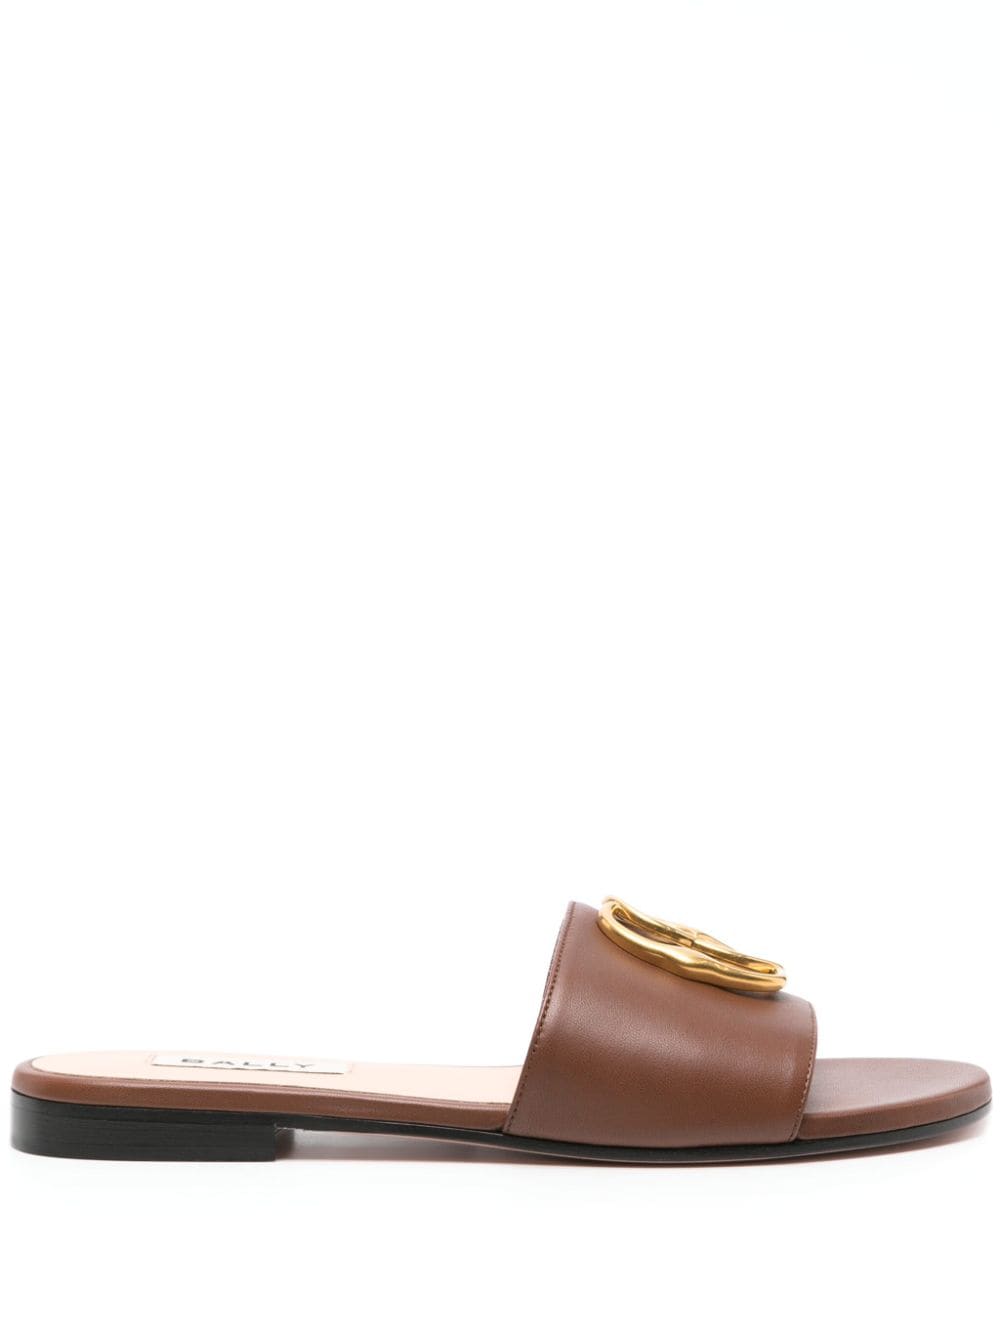 Bally Ghis leather mules - Brown von Bally